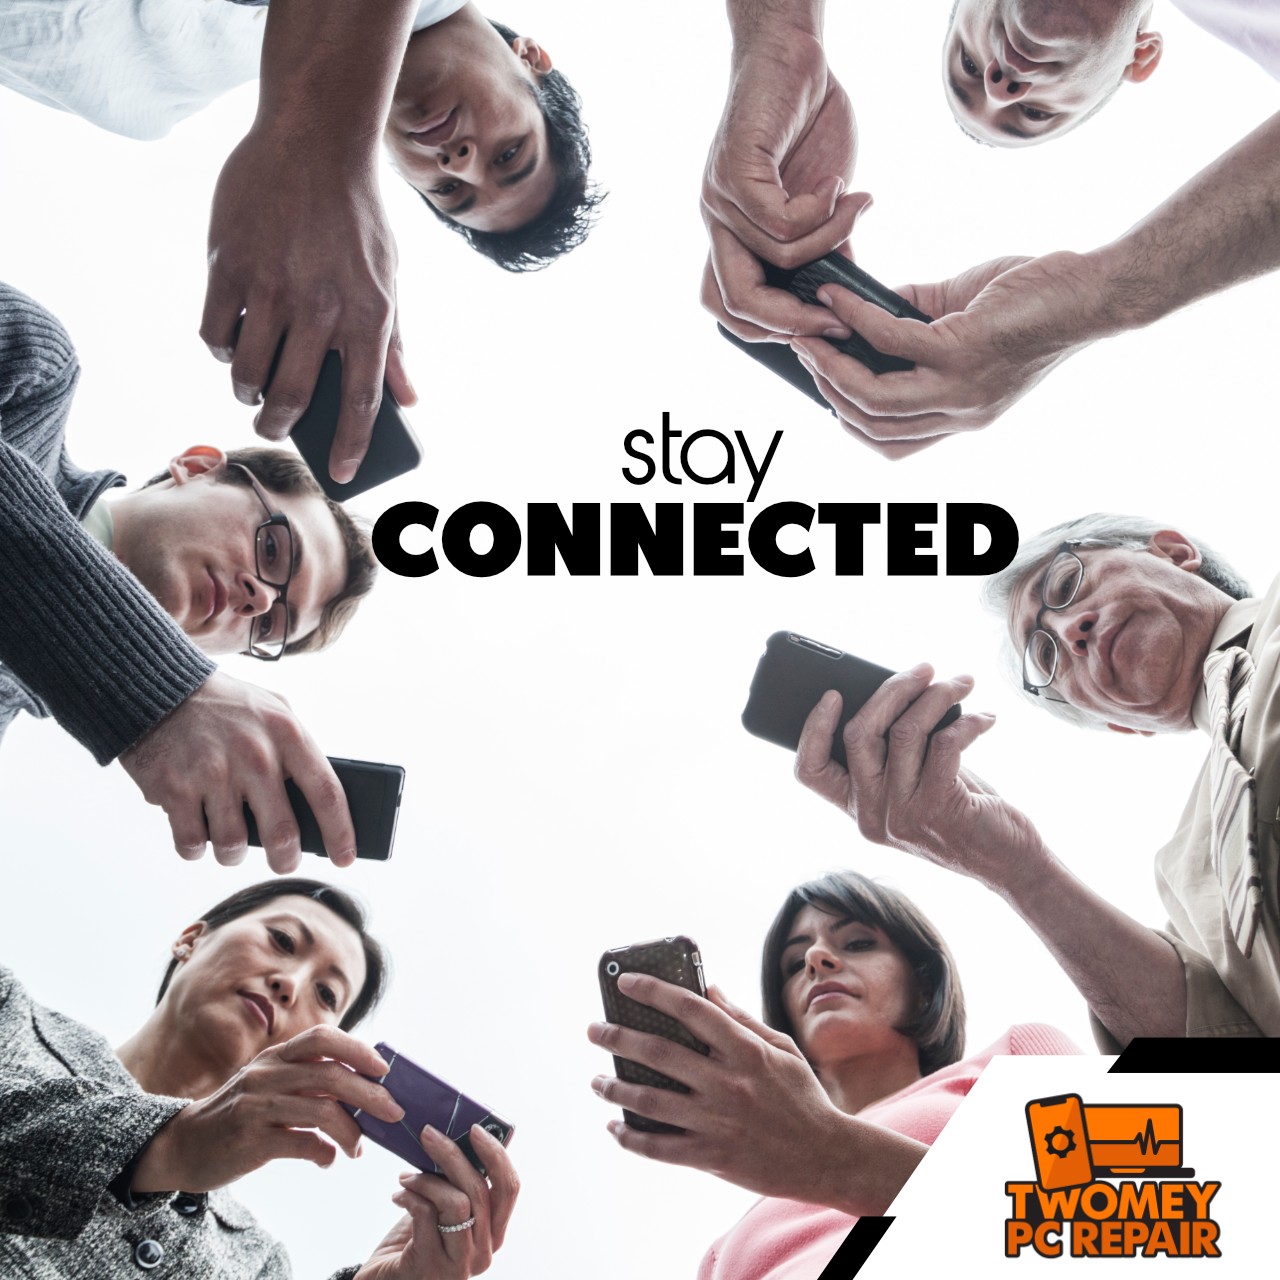 A group of people holding cell phones with the text stay connected.